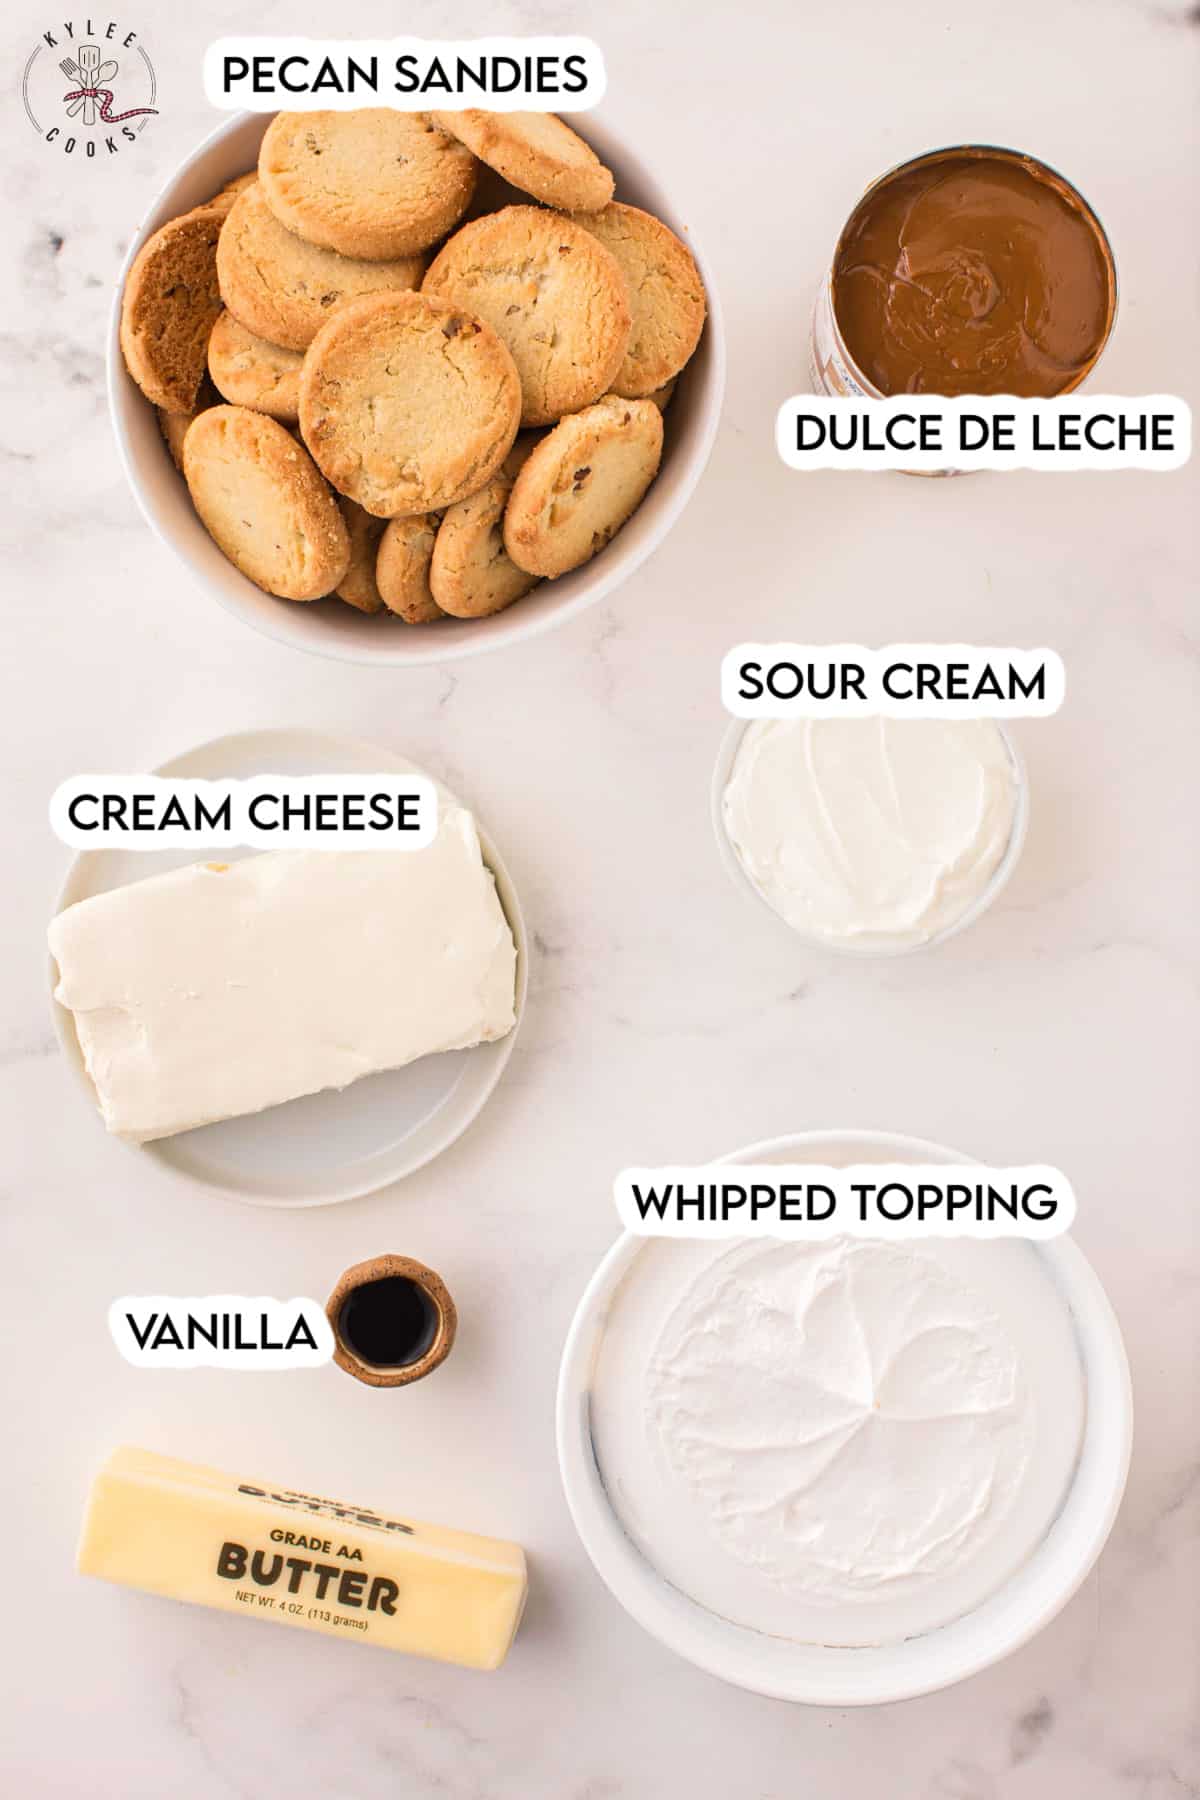 ingredients to make dulce de leche cheesecake laid out and labeled.